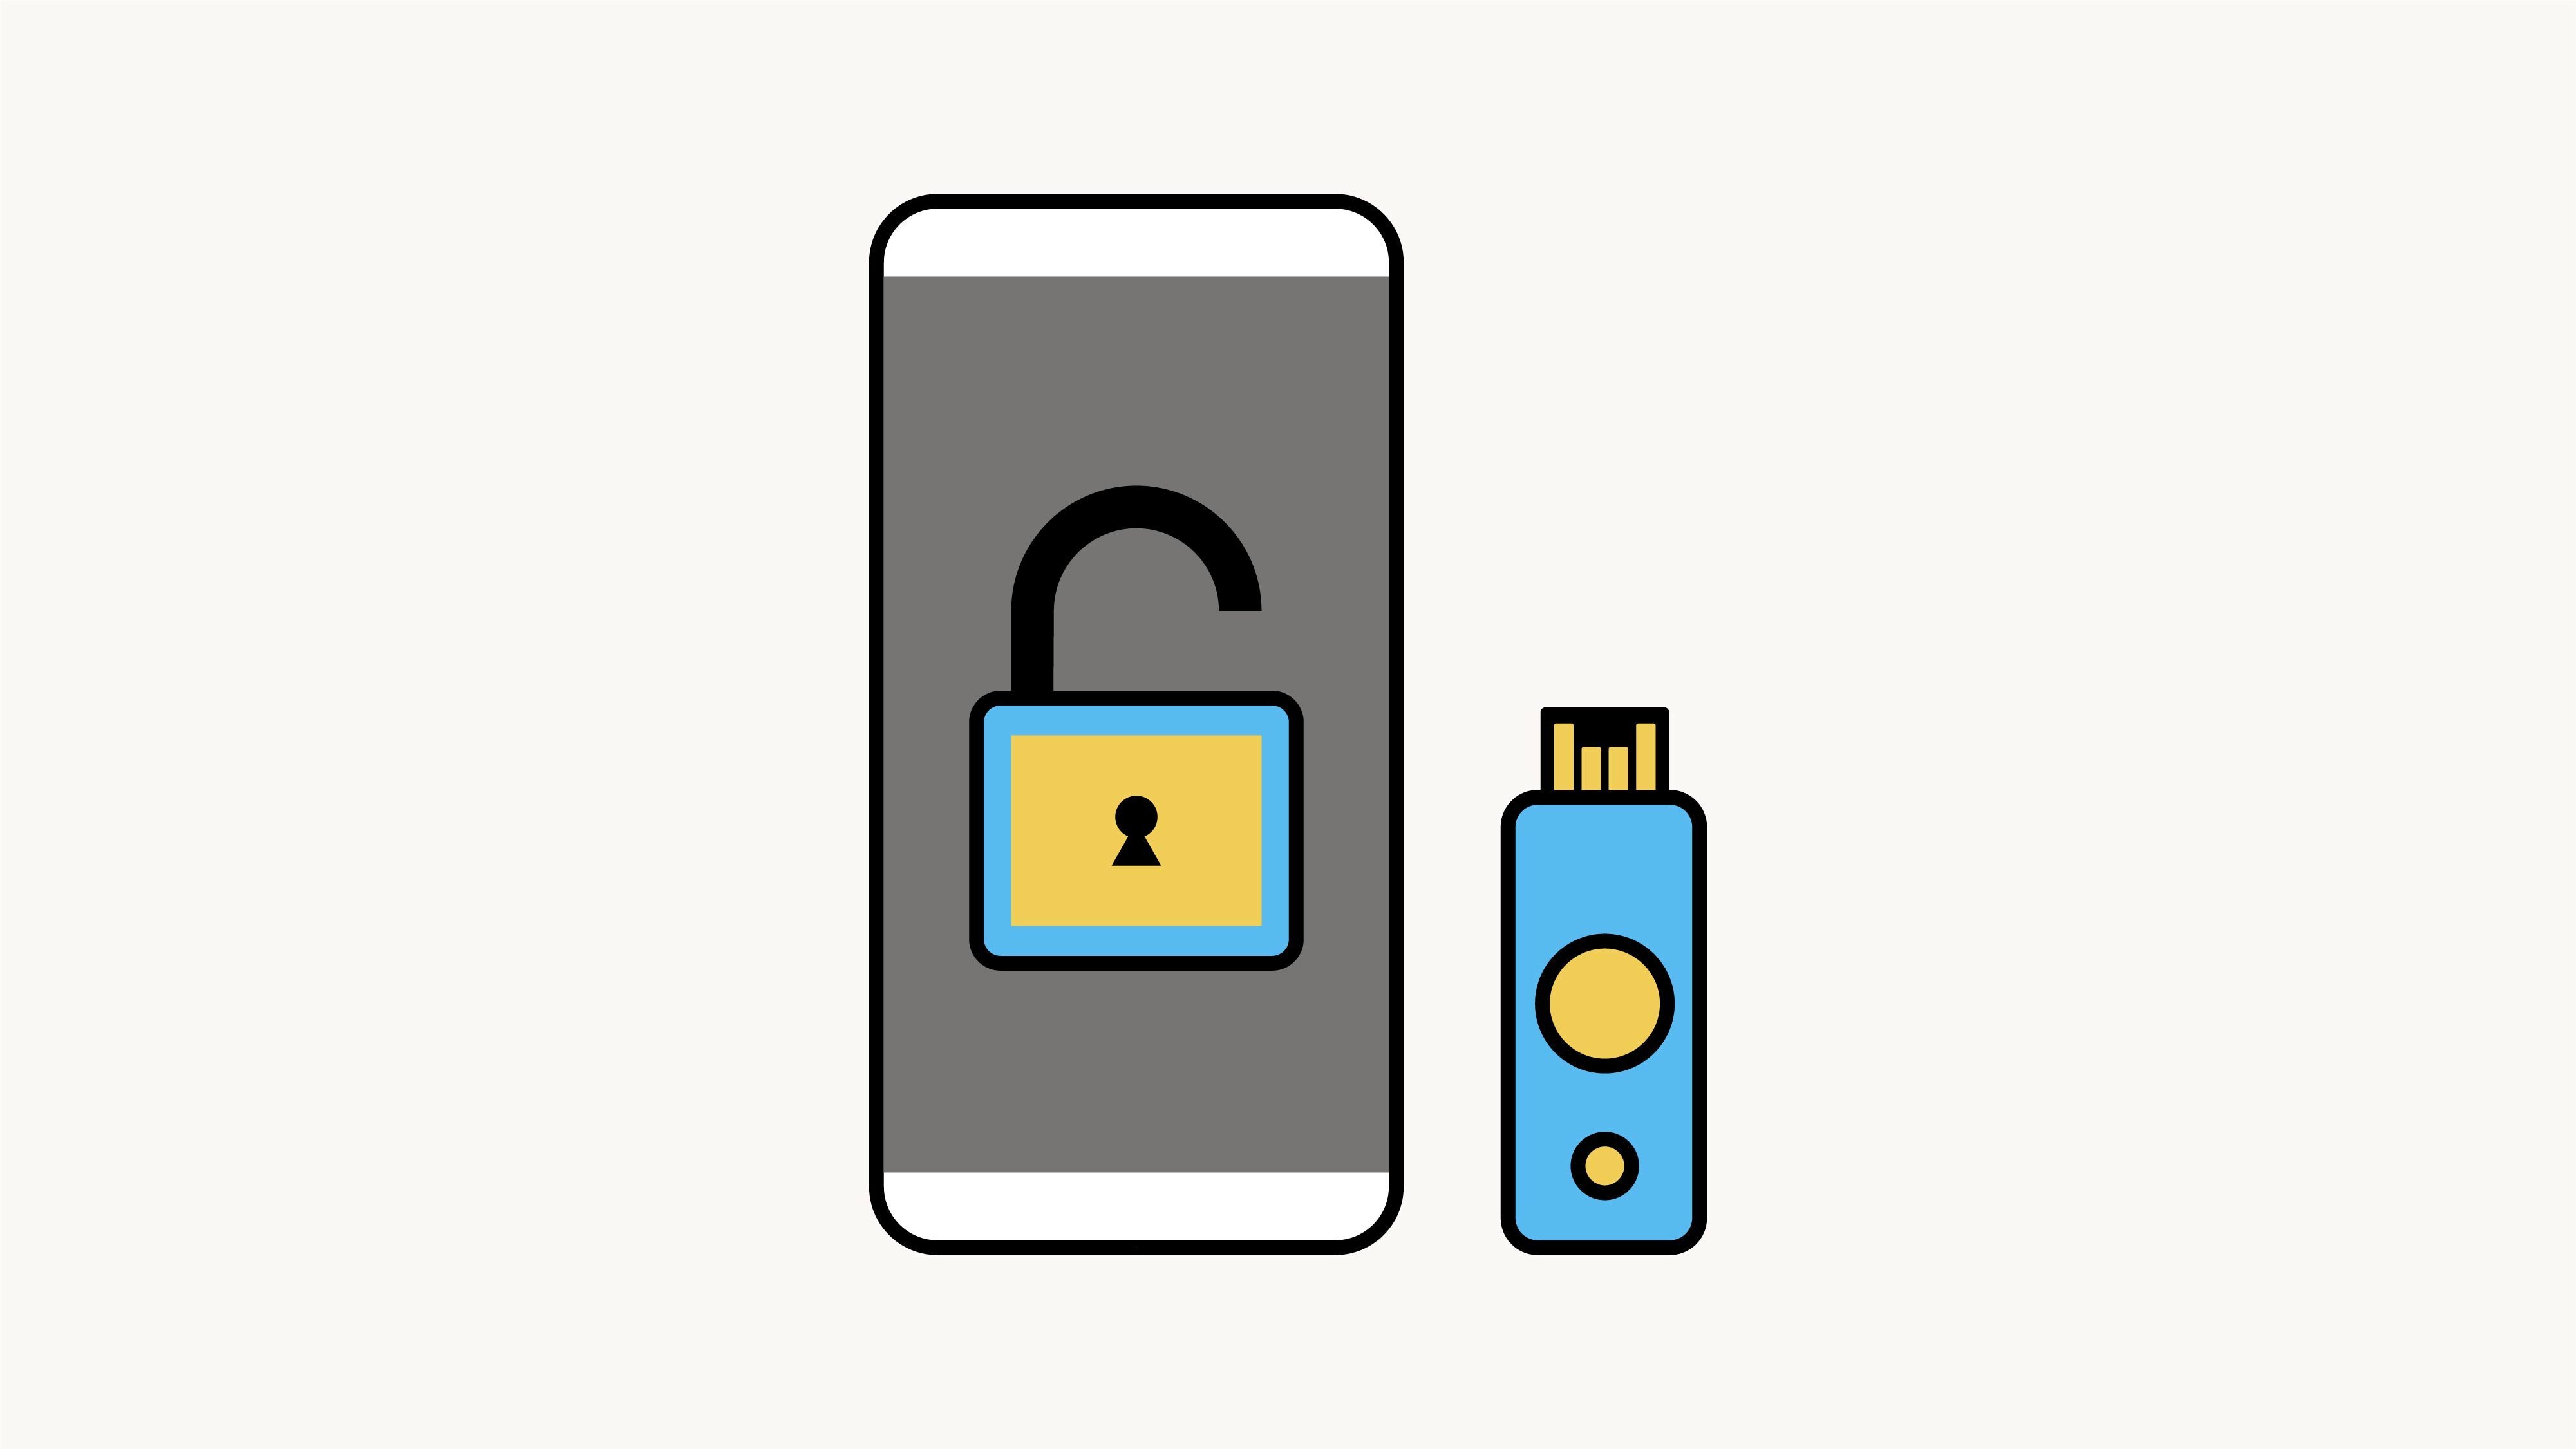 You can now use a physical security key to log into Facebook on Android and iOS